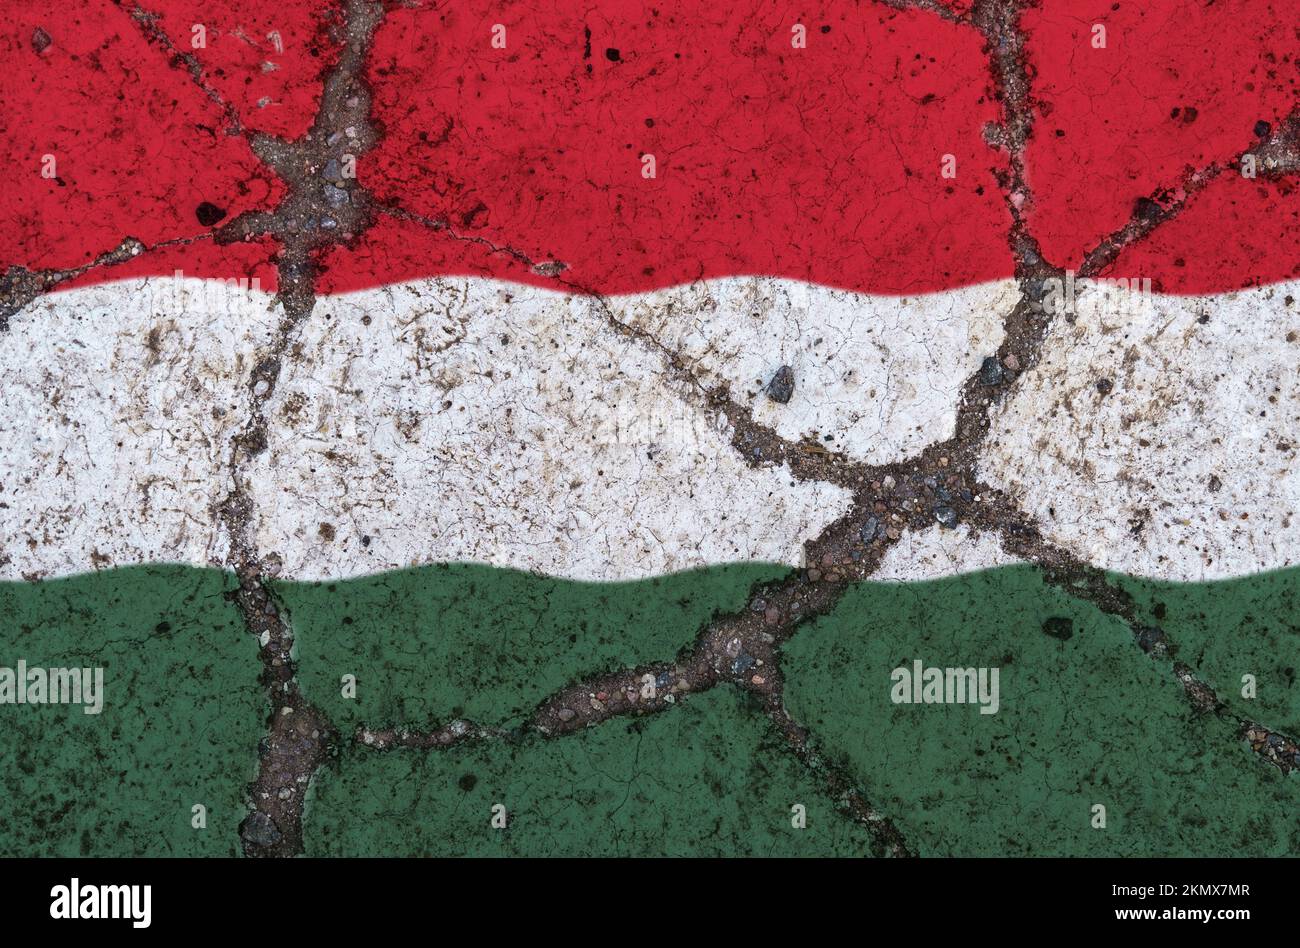 Hungary flag on cracked asphalt. The concept of crisis, default, economic collapse, pandemic, conflict, terrorism in the country. Out of focus image Stock Photo